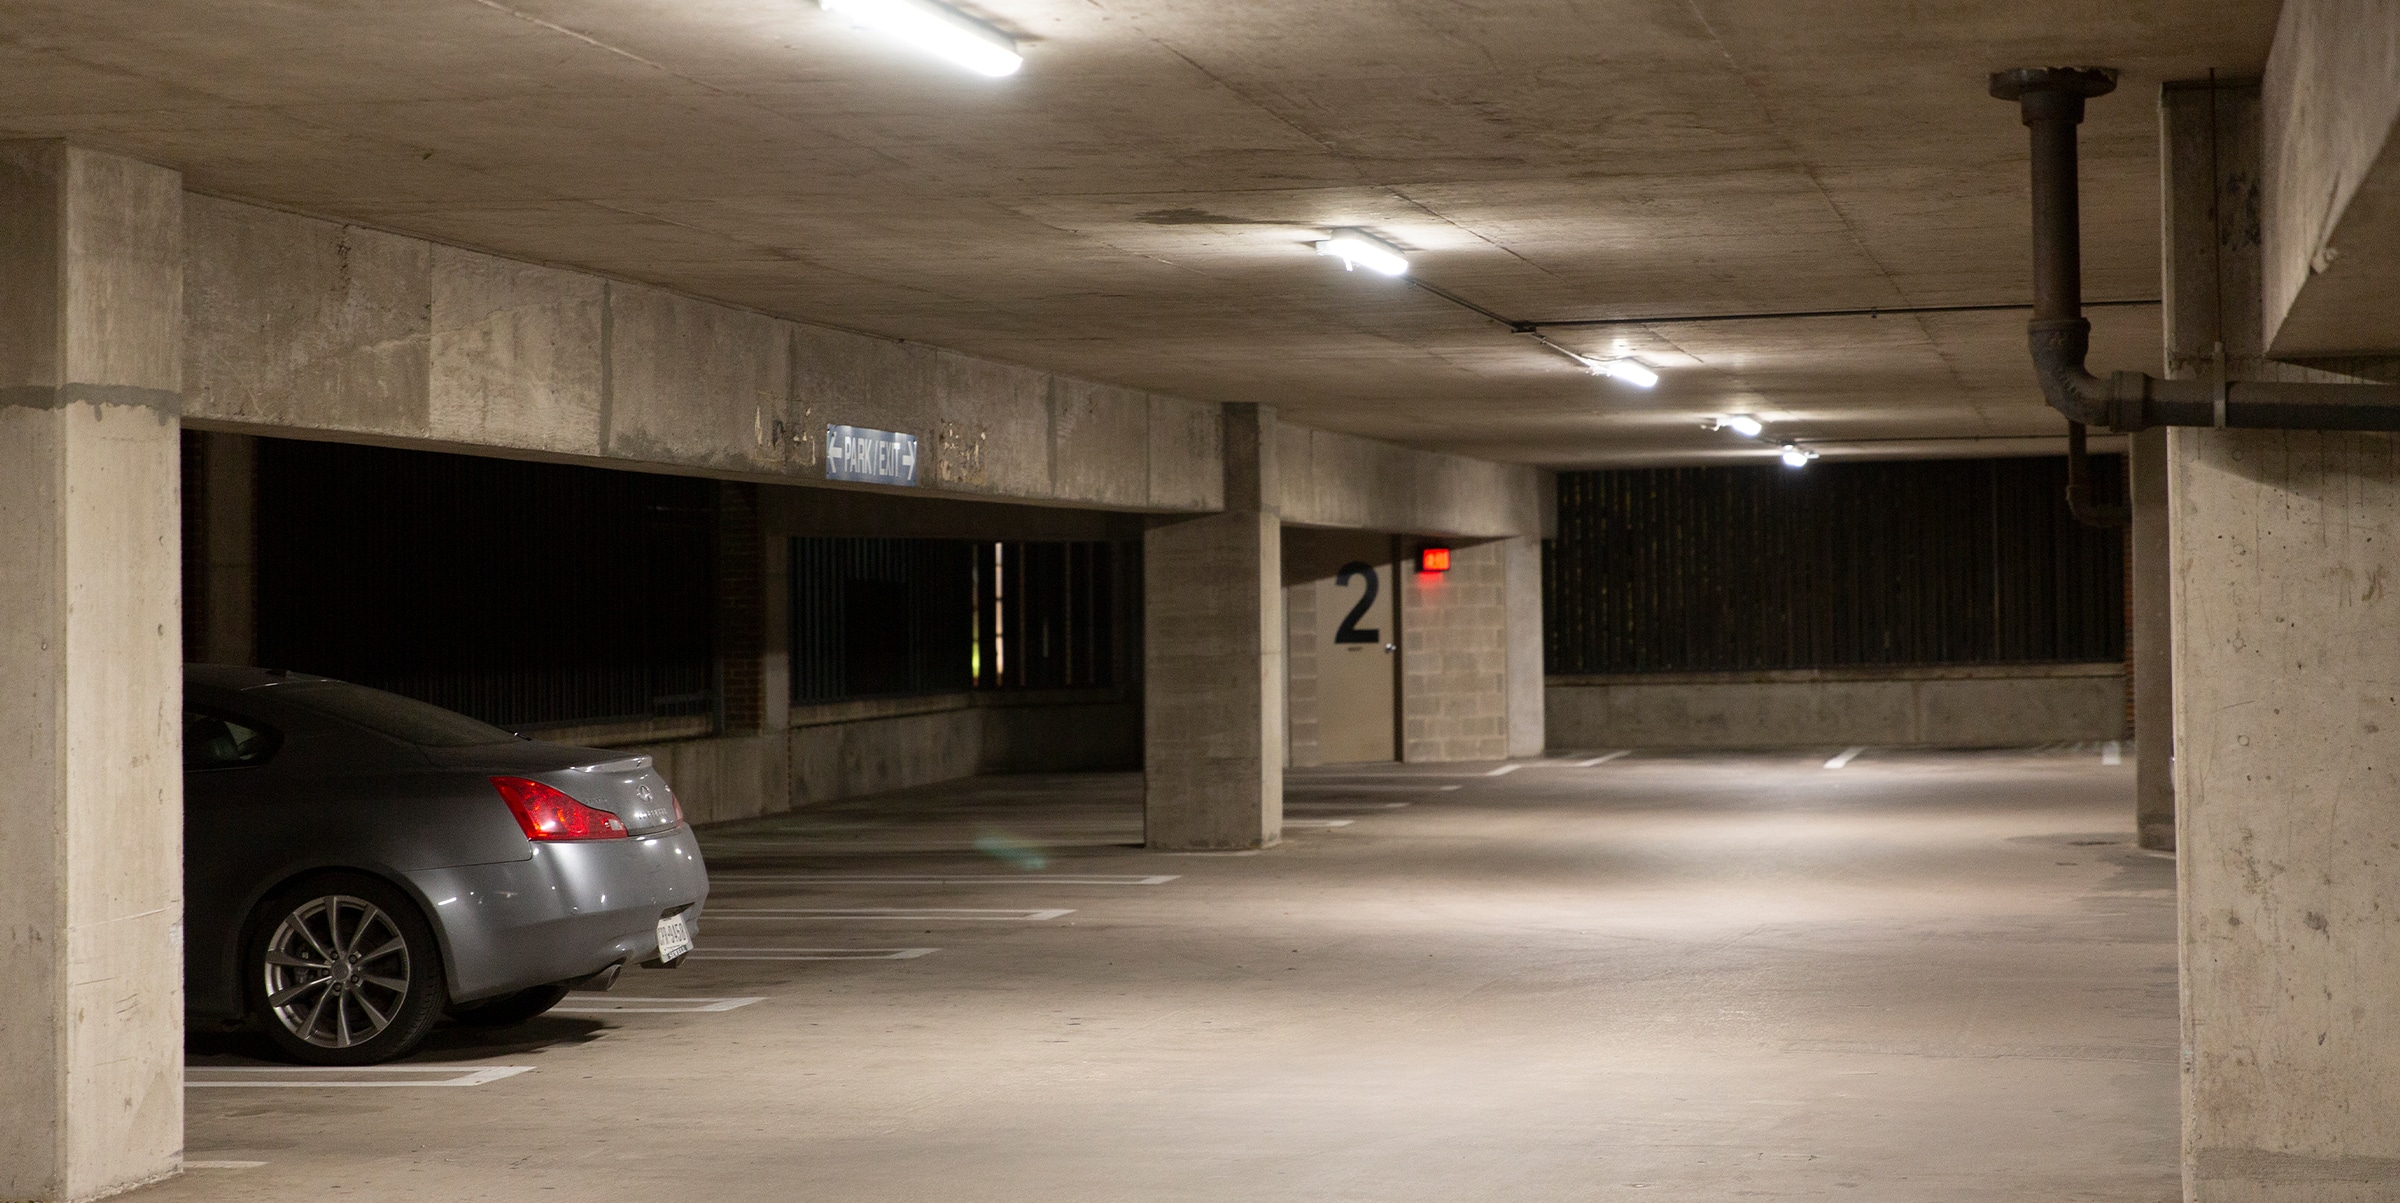 Casestudy Galleryimage Rossgarage 9 1 - WLS Lighting Systems